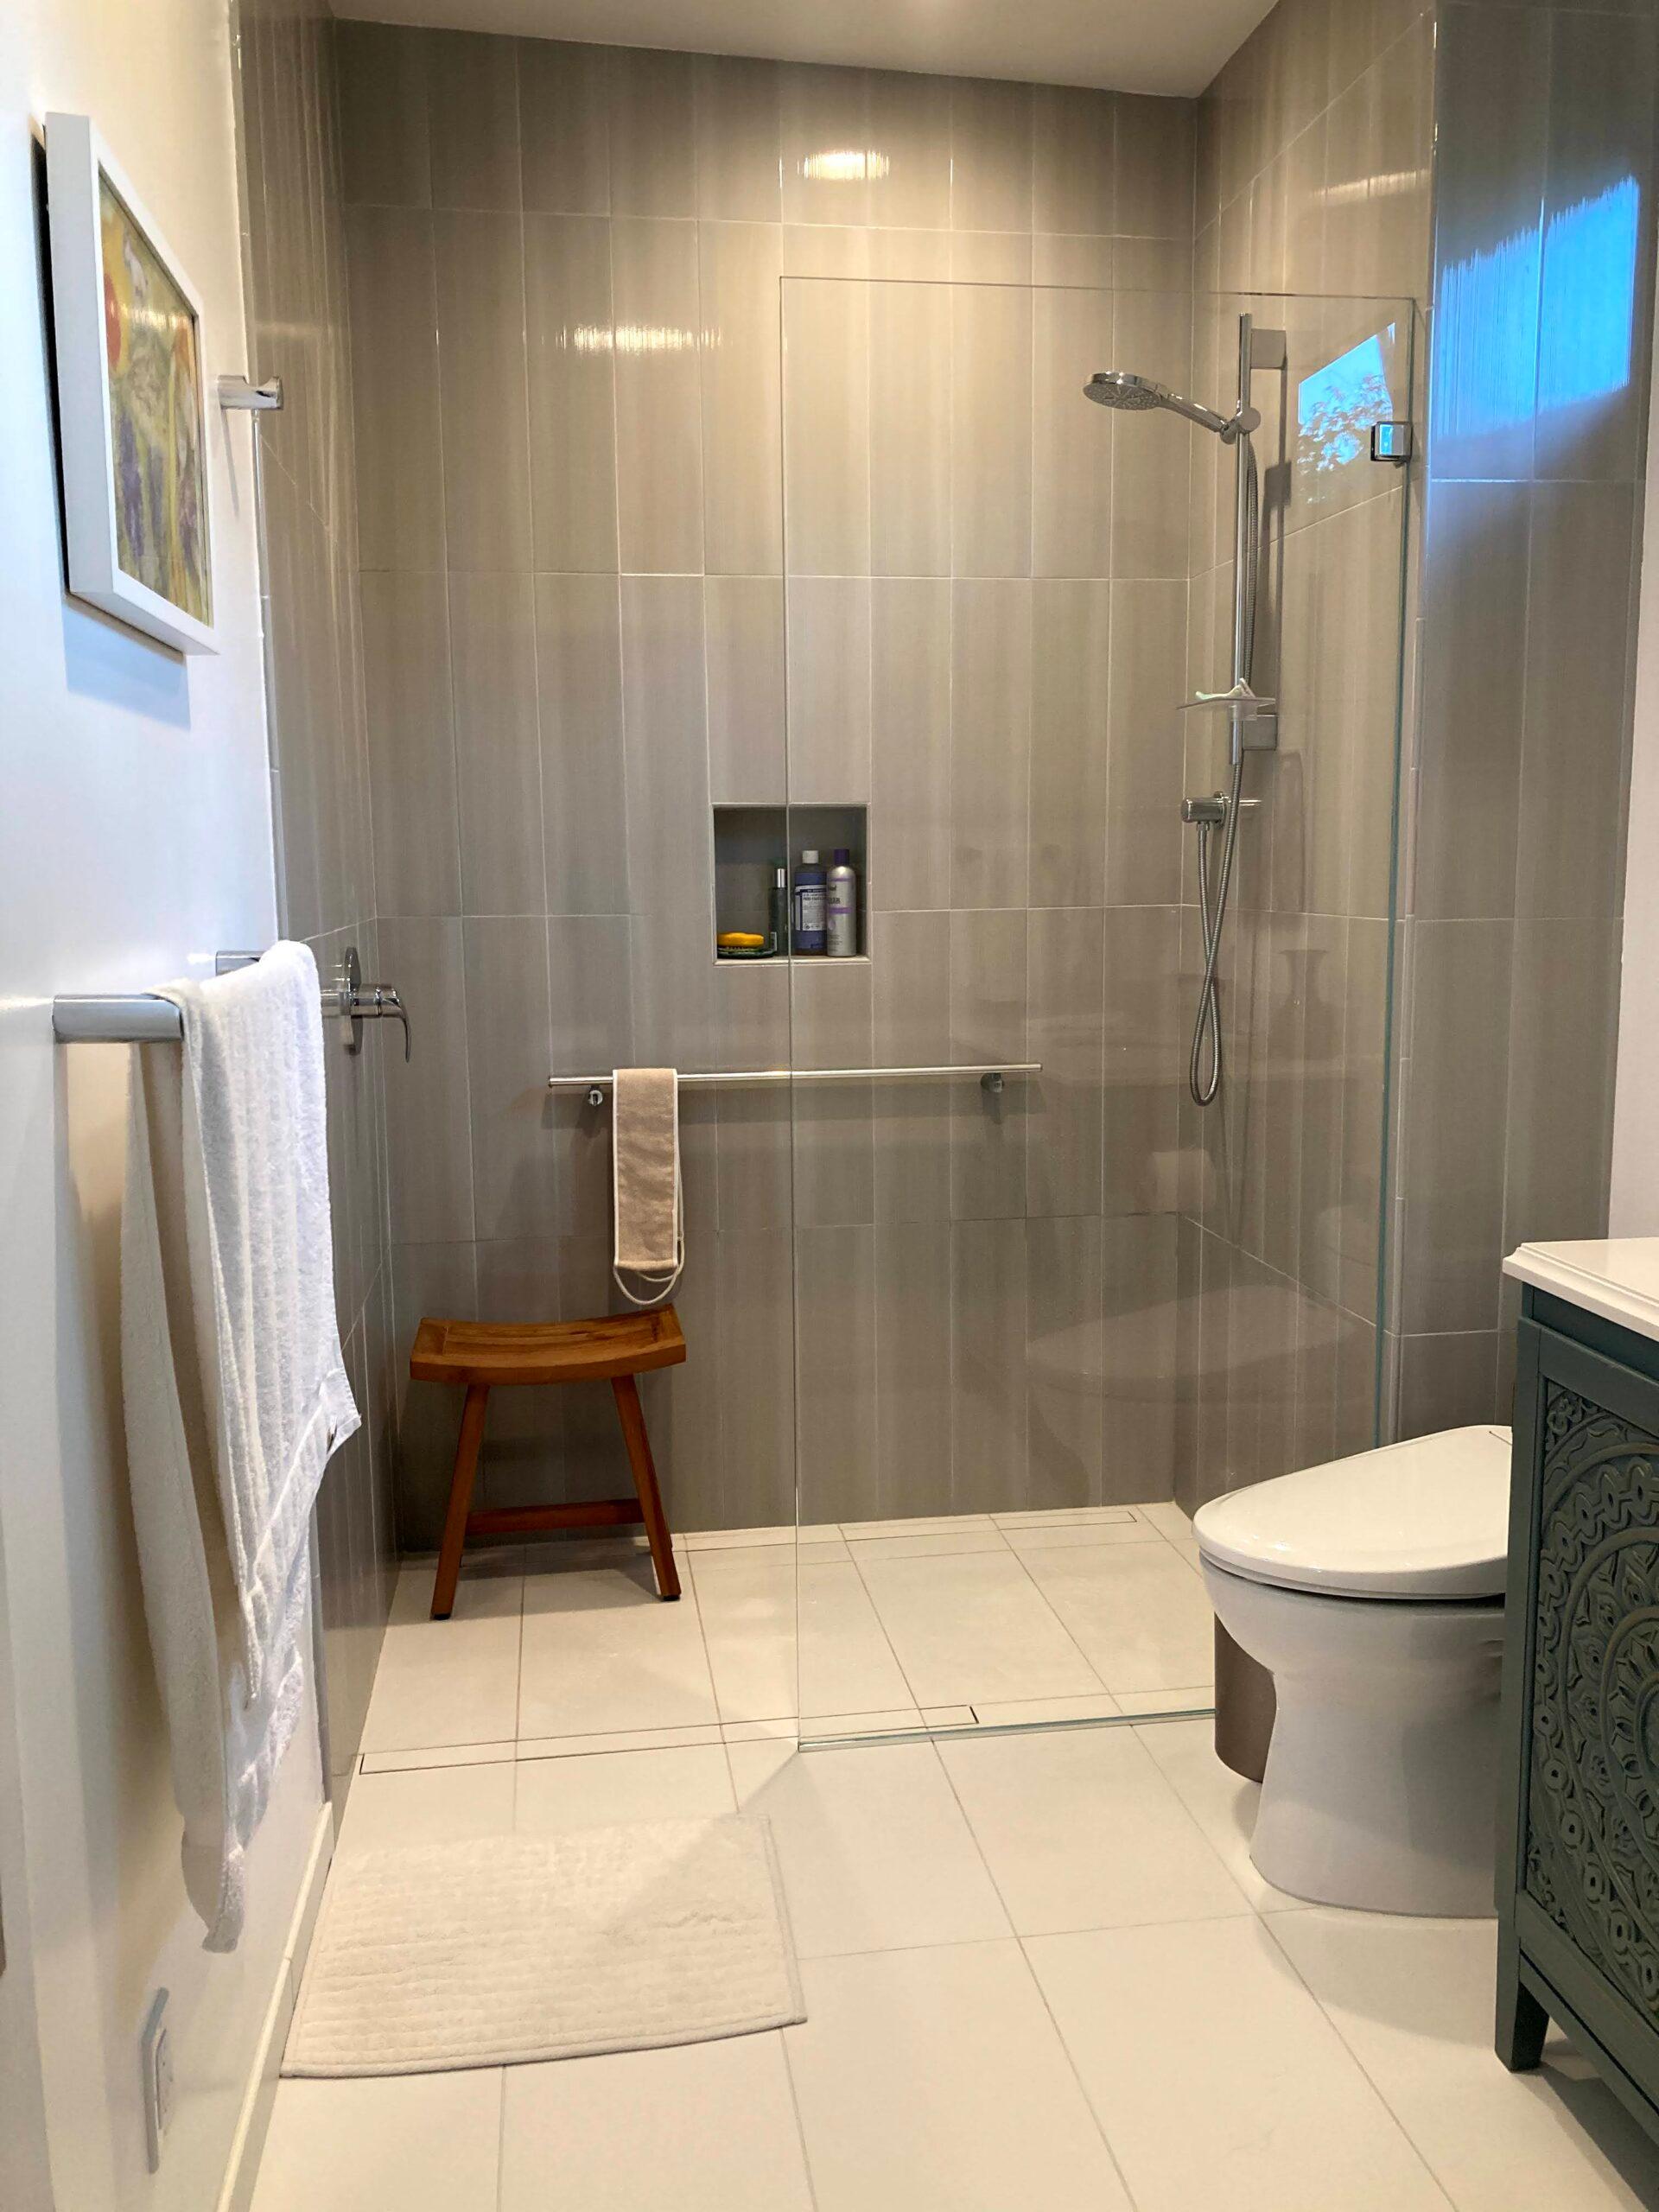 Picture of Green Living Builders installed this glass shower door to maximize the visual appearance of the small bathroom space. - Green Living Builders LLC